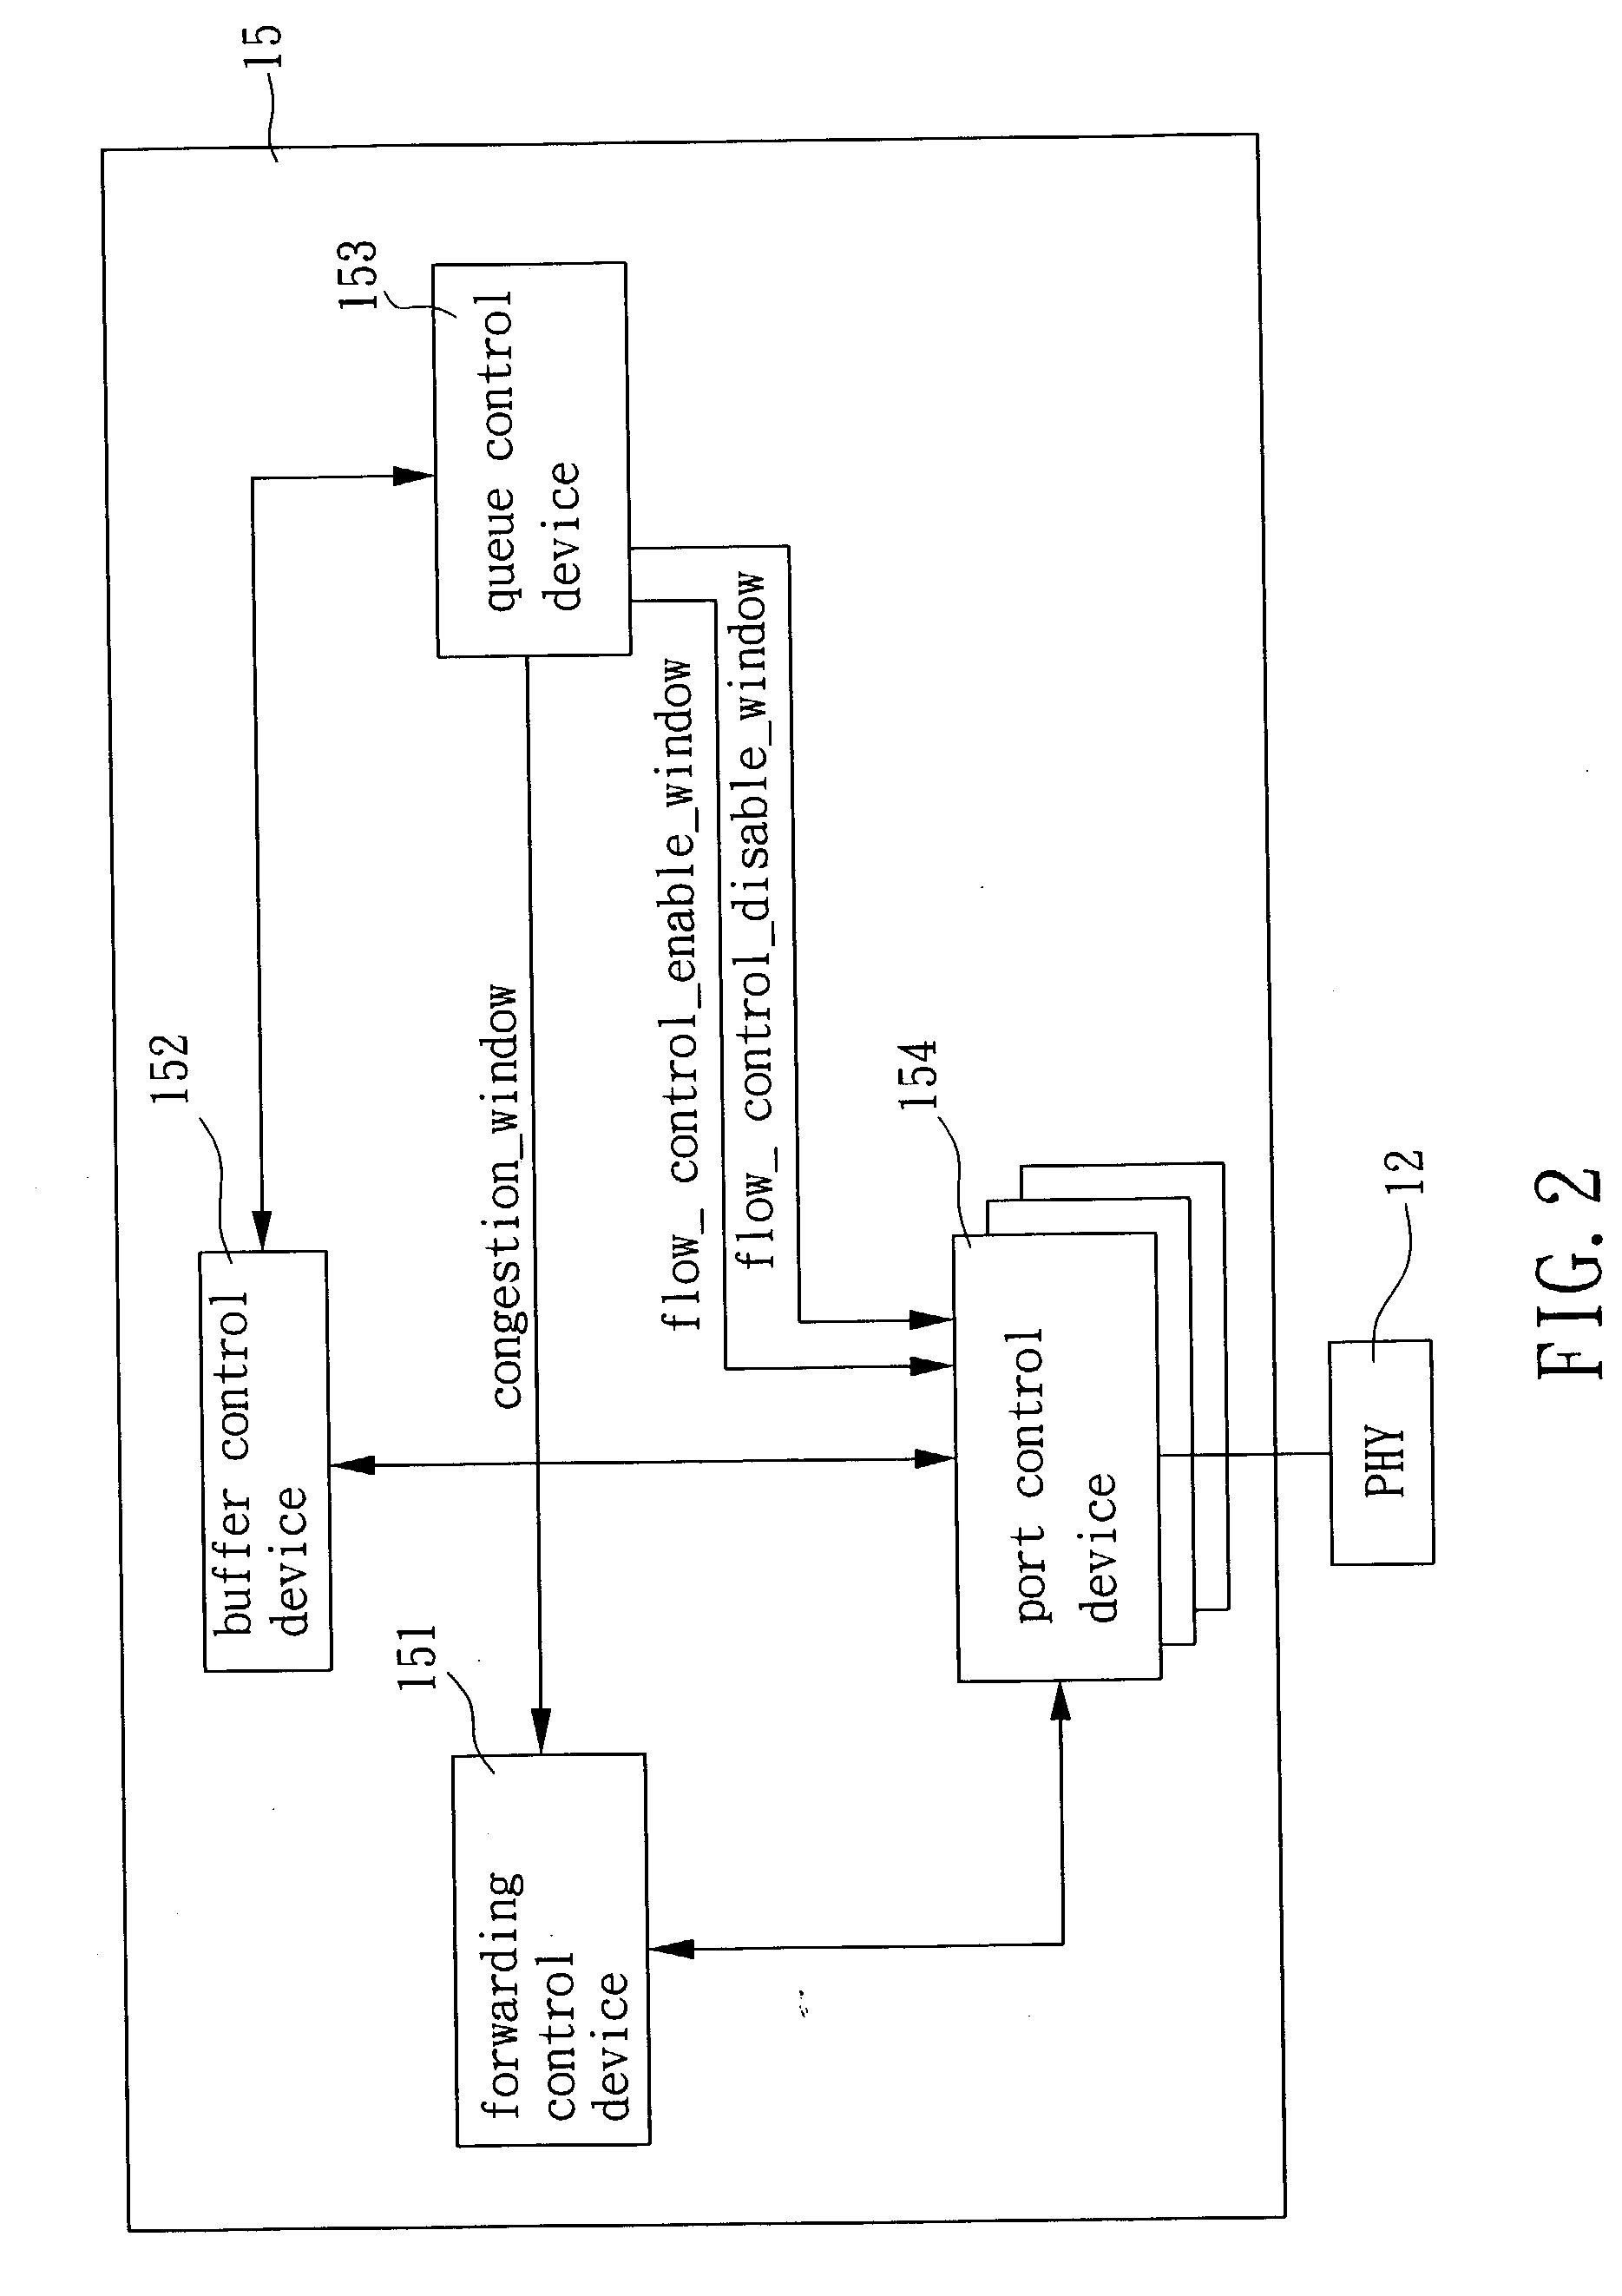 Method for congestion control and associated switch controller